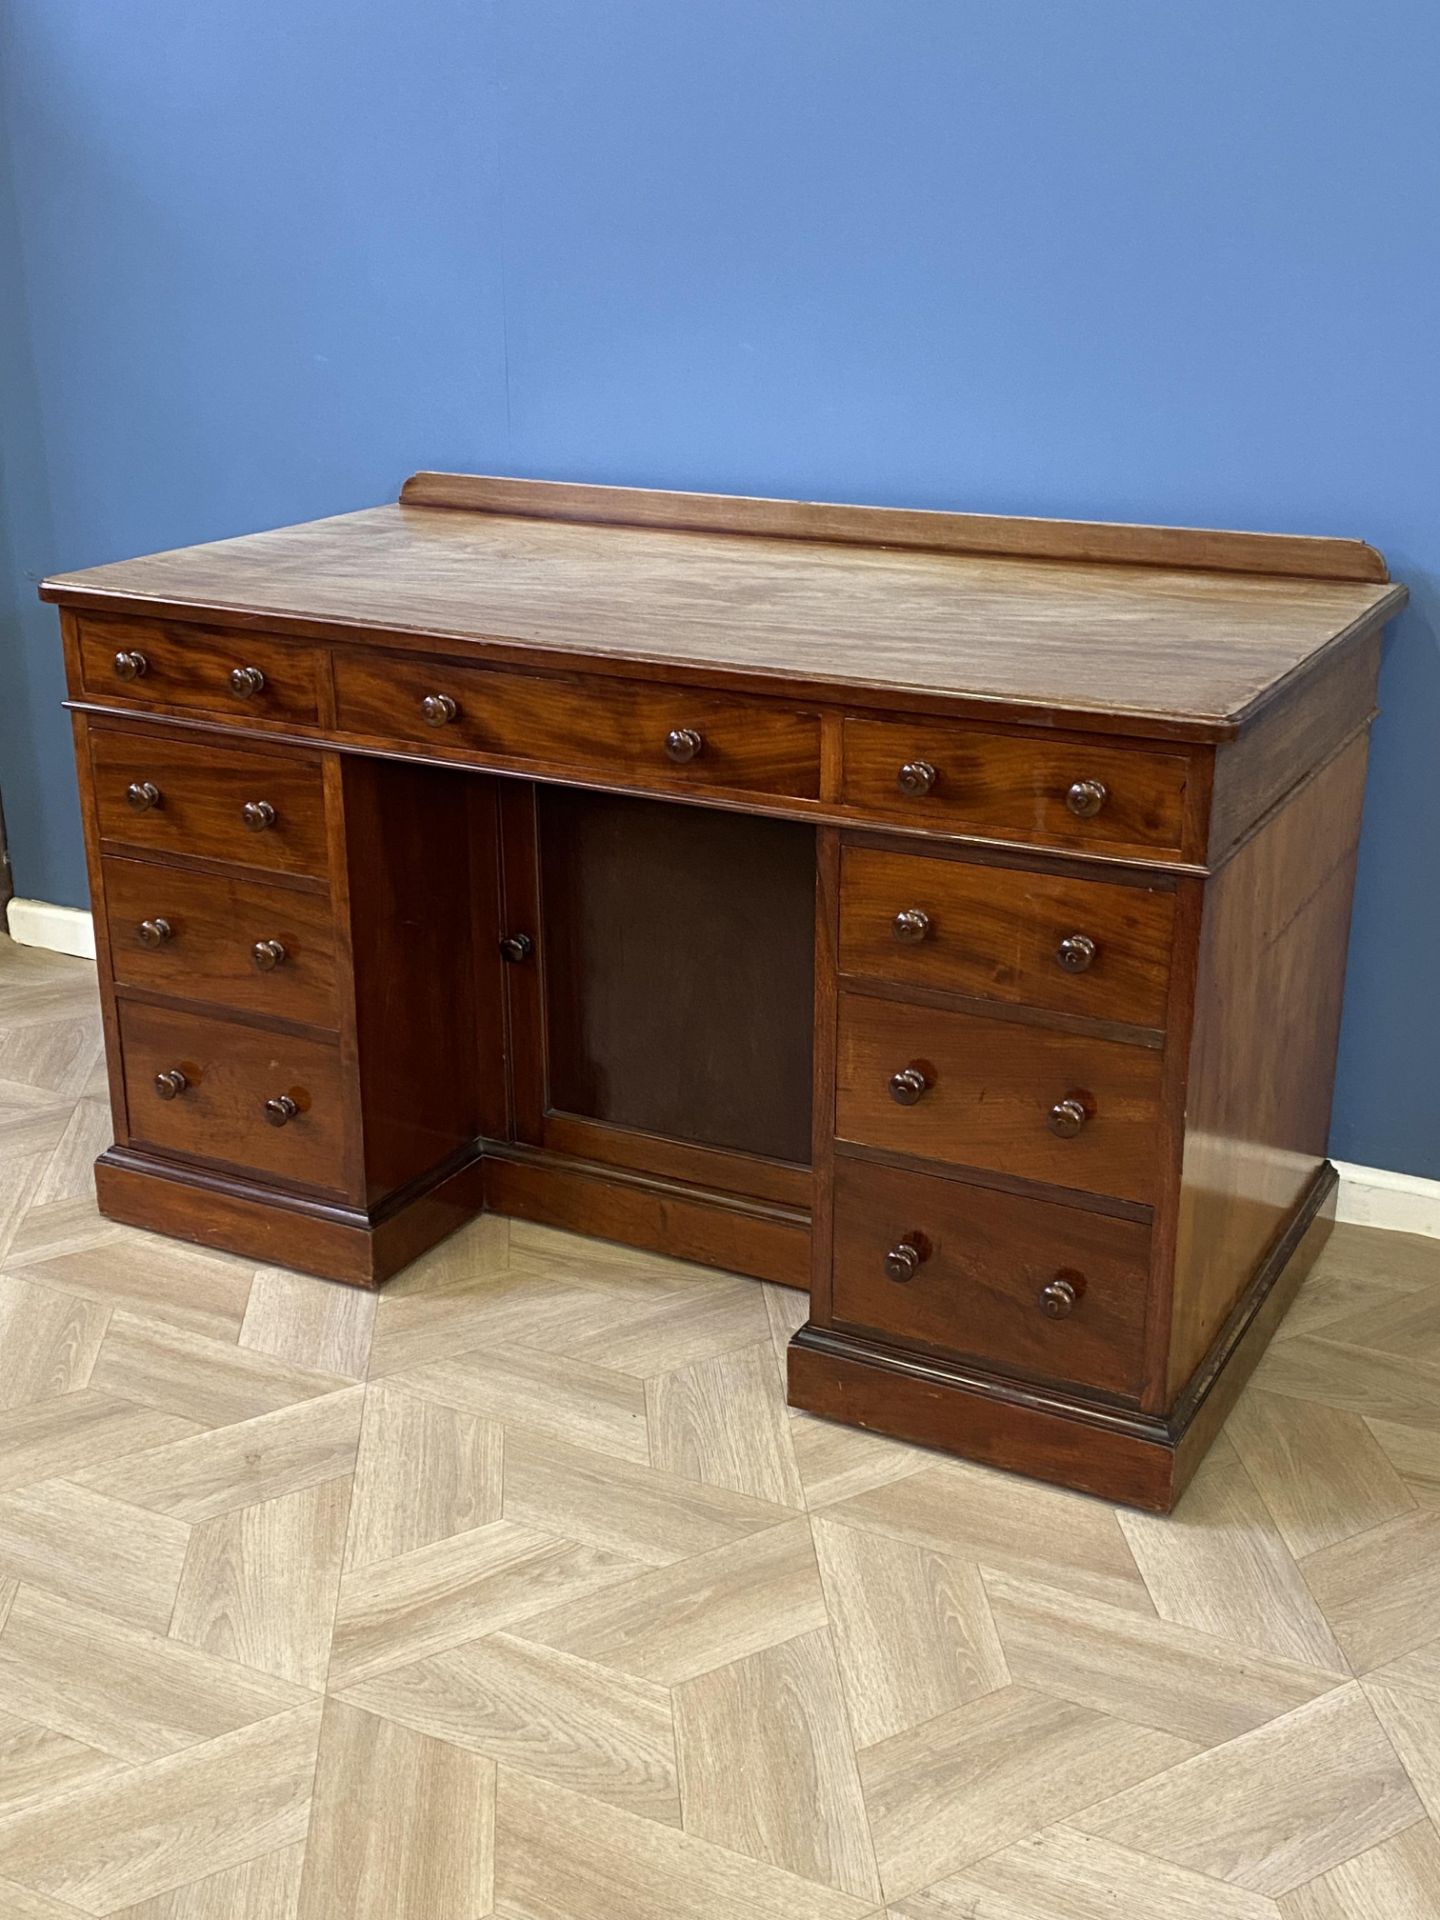 Holland & Sons Victorian mahogany kneehole desk - Image 9 of 9